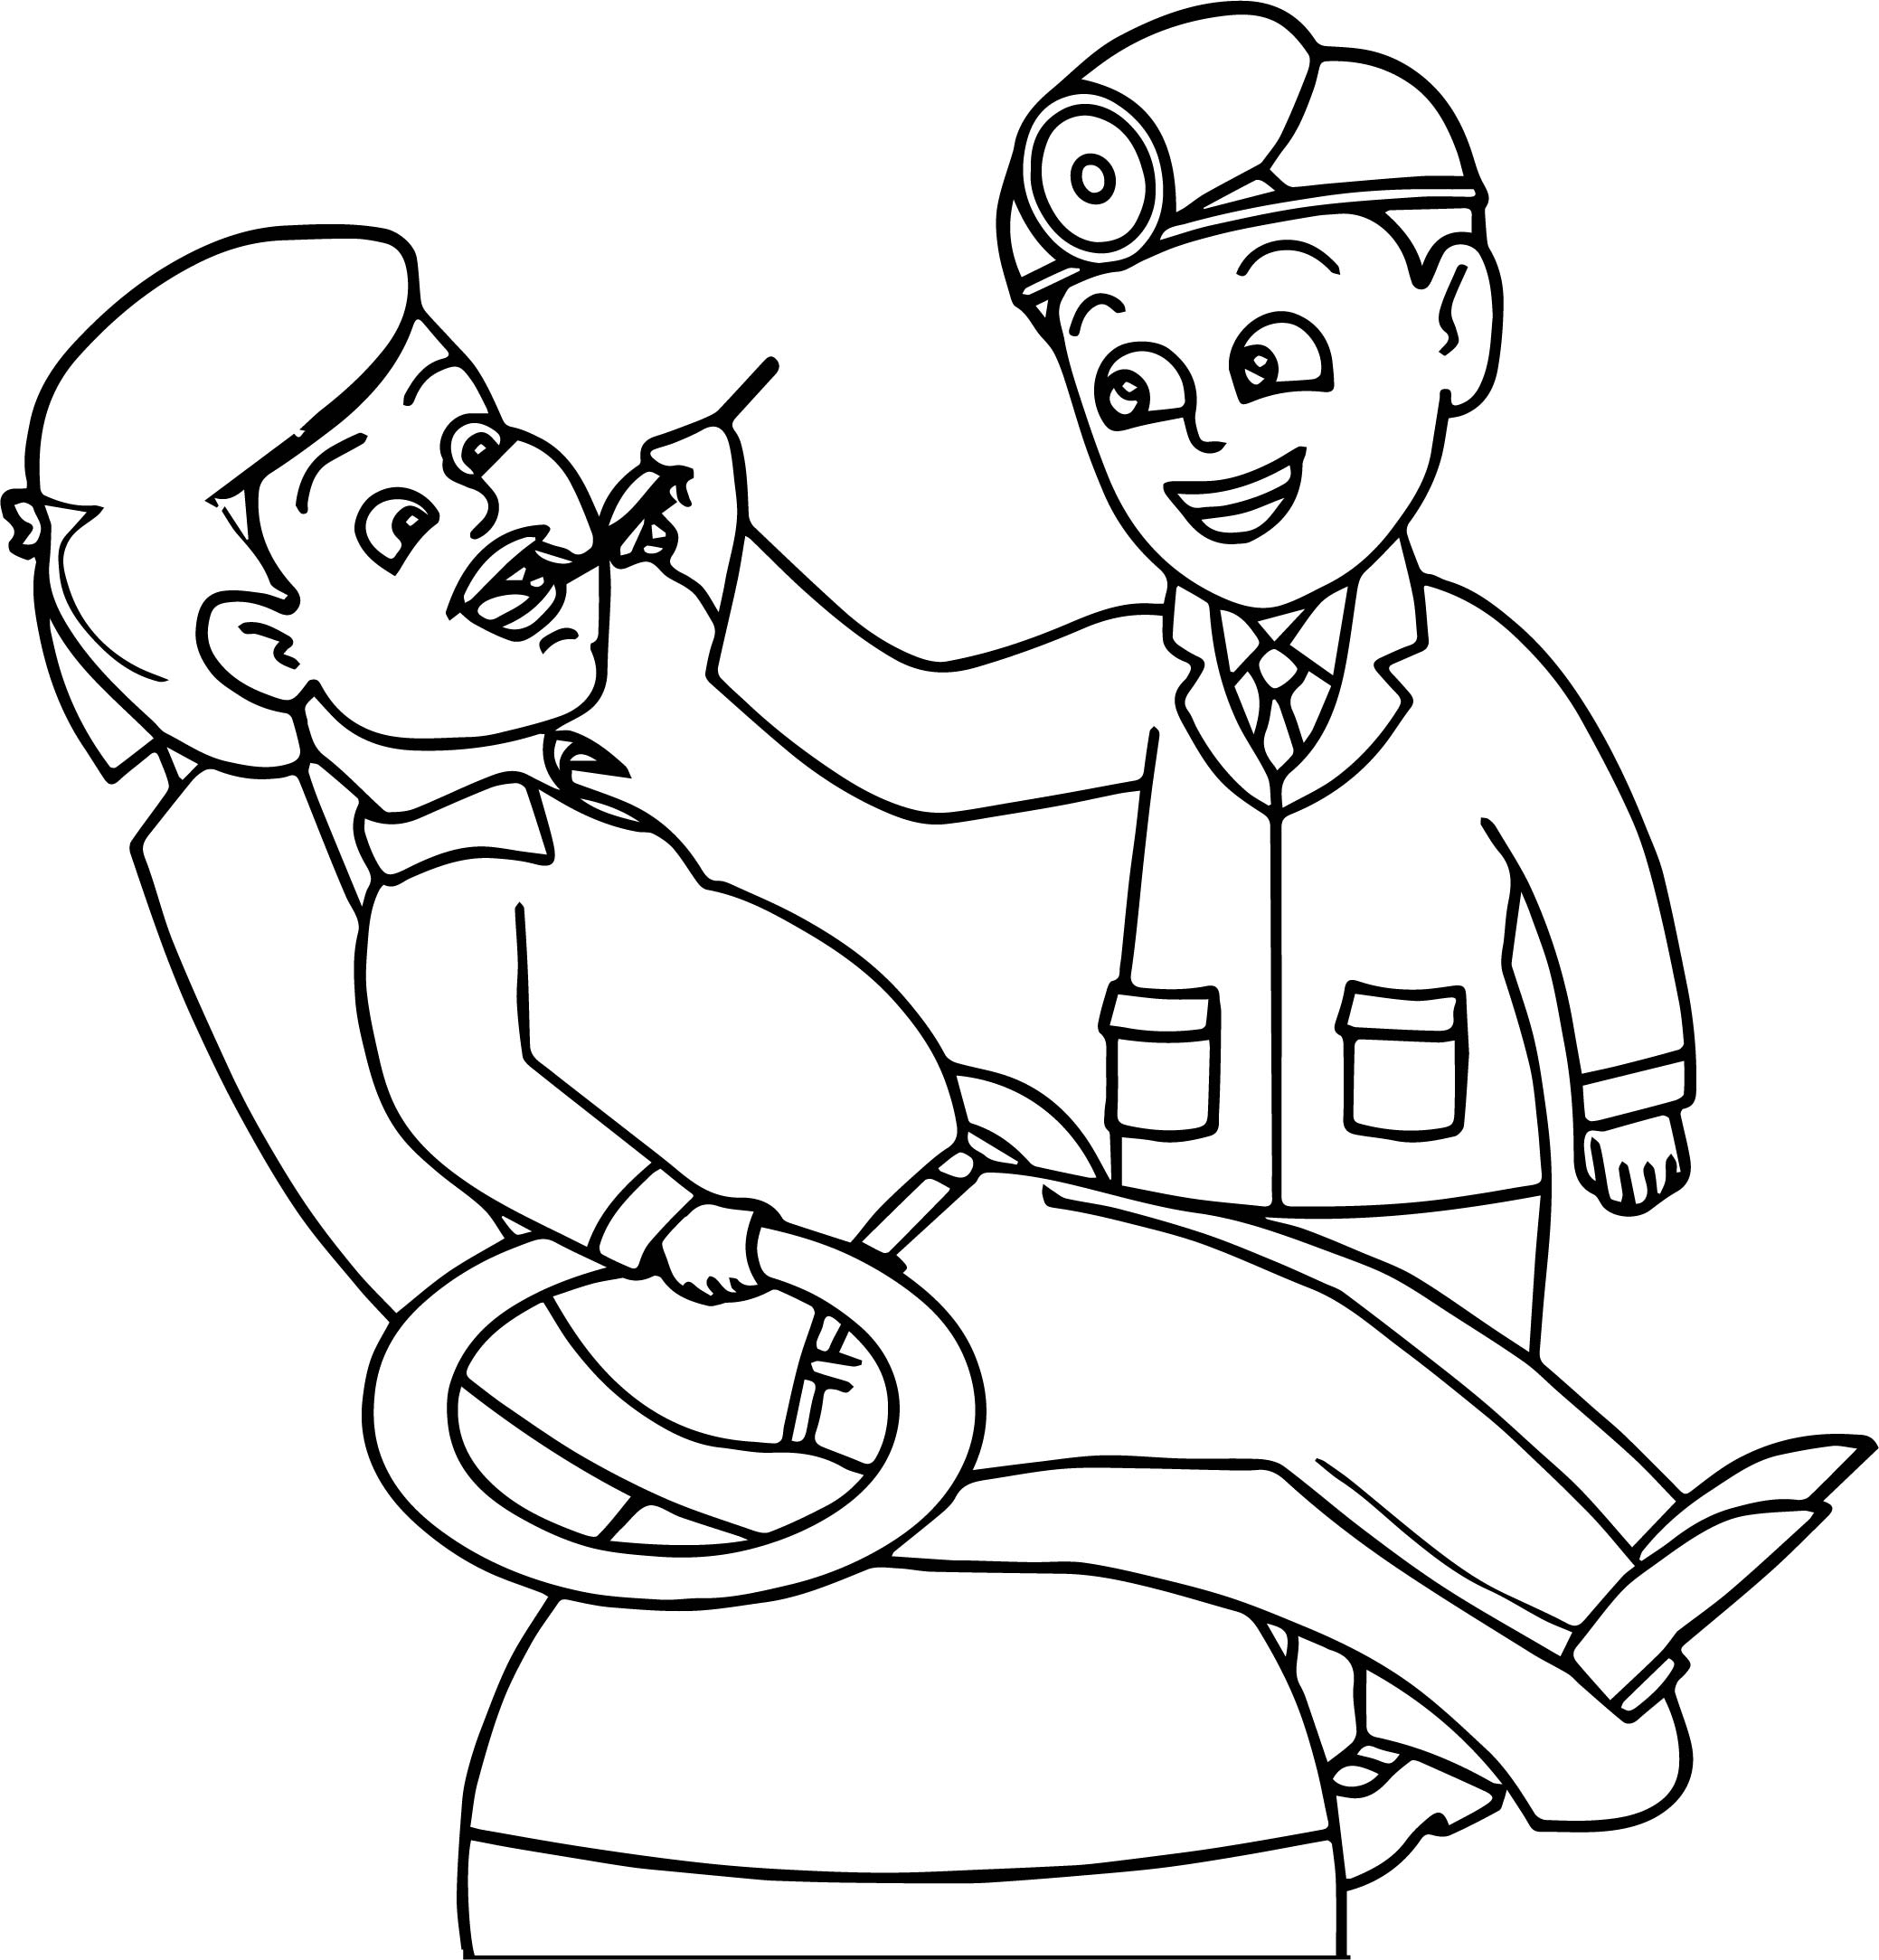 Dentist Checking Patient Coloring Page